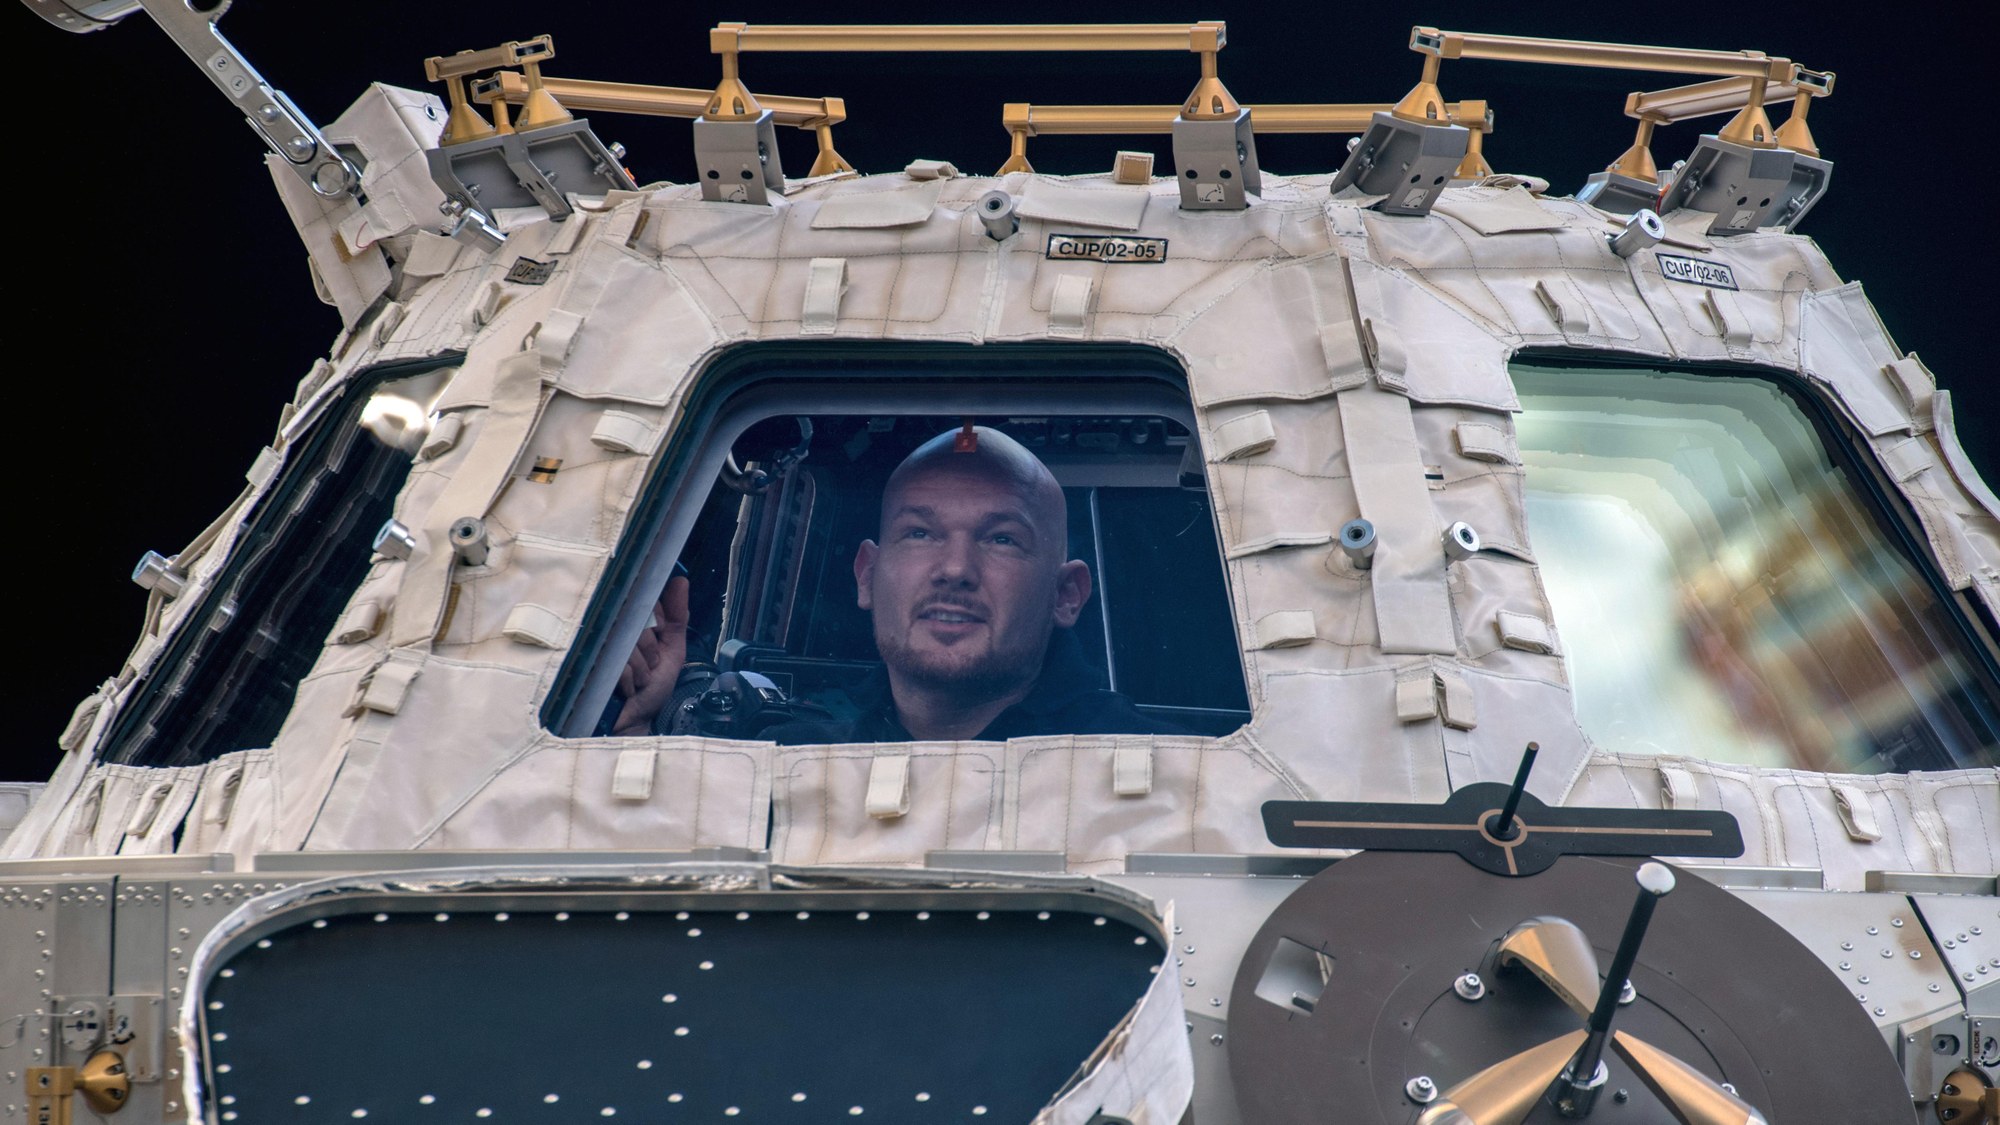 Alexander Gerst in the Cupola